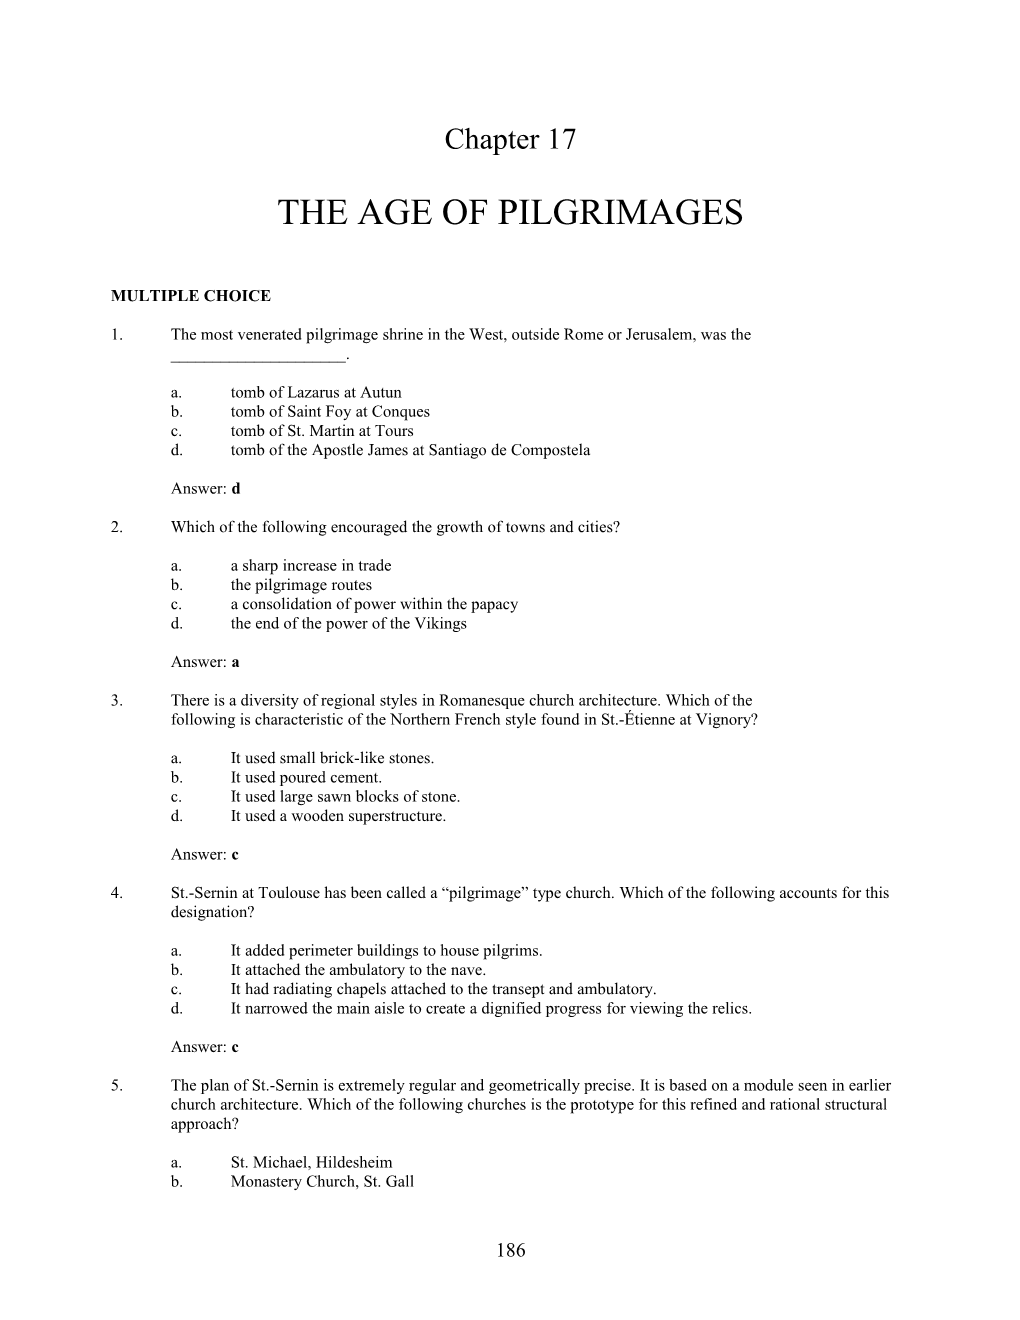 The Age of Pilgrimages